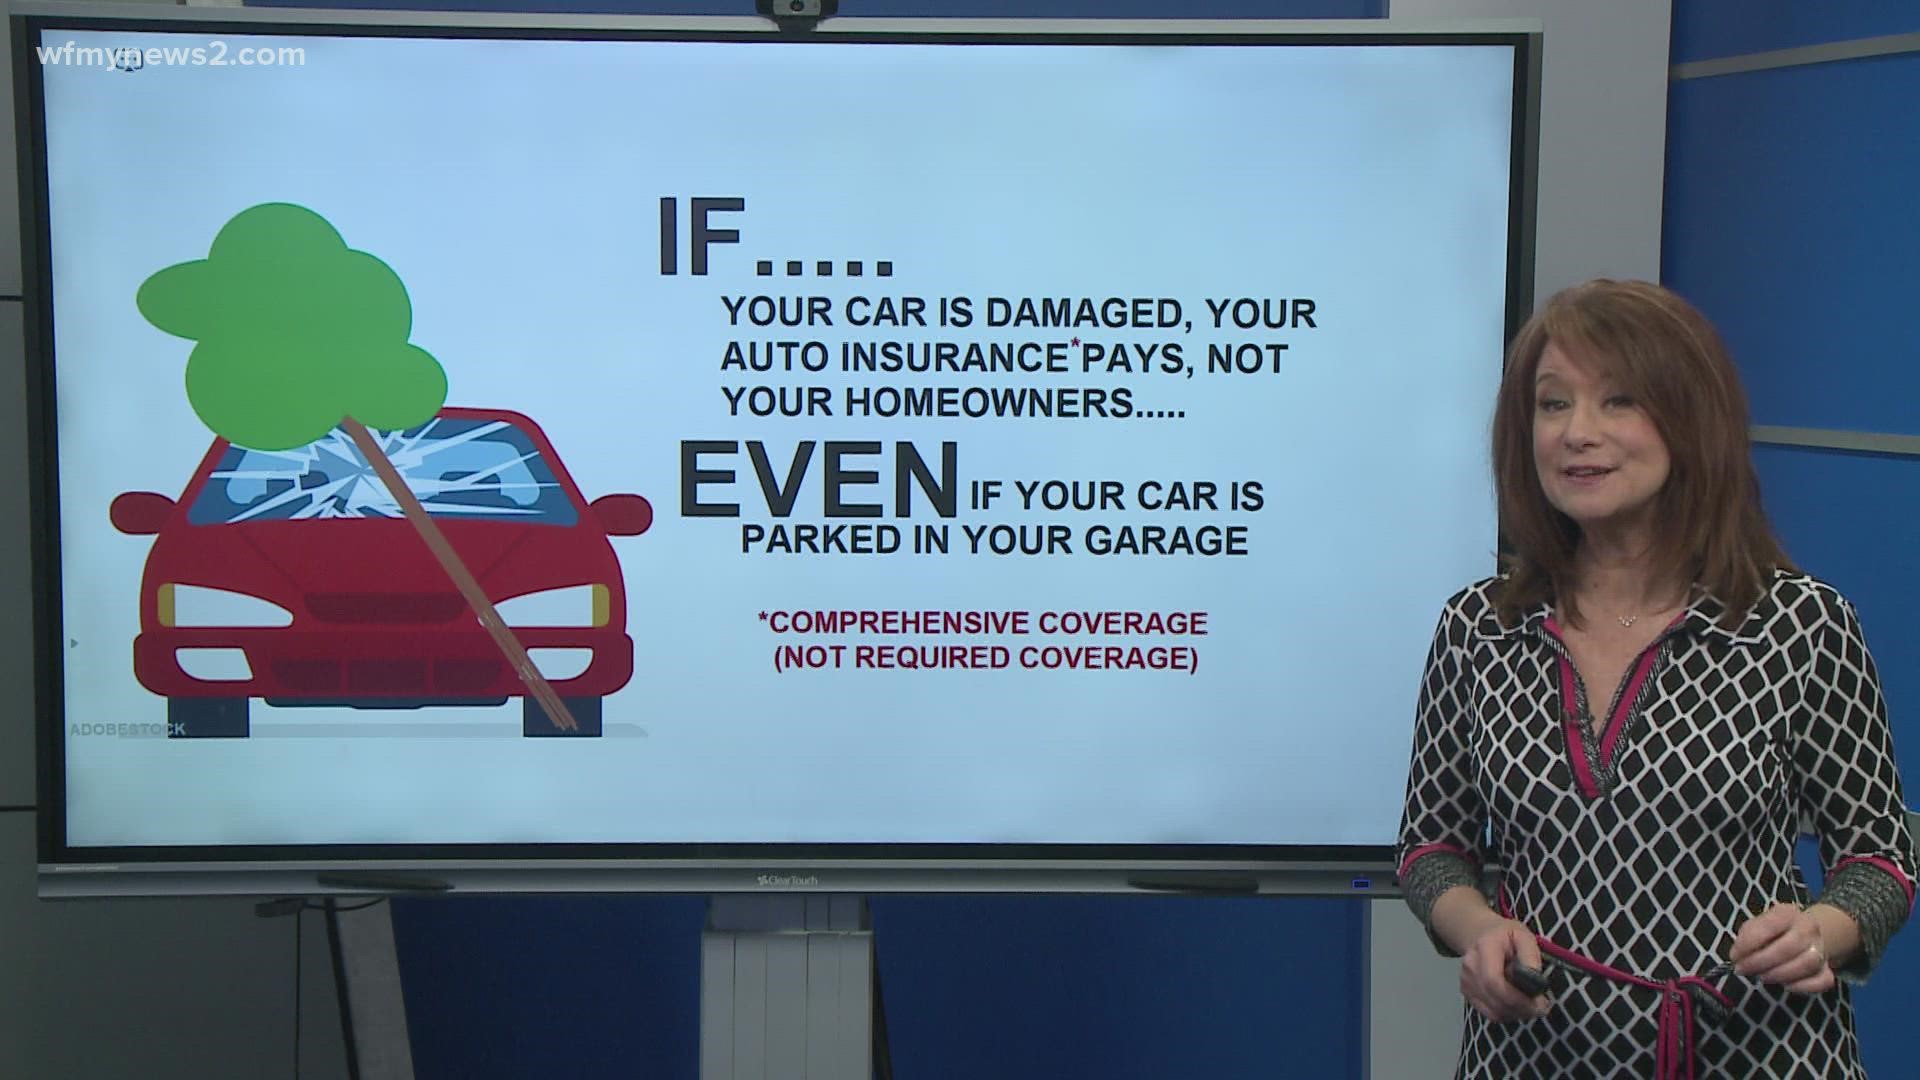 Storm season is here. So what does your insurance cover when it comes to your car?